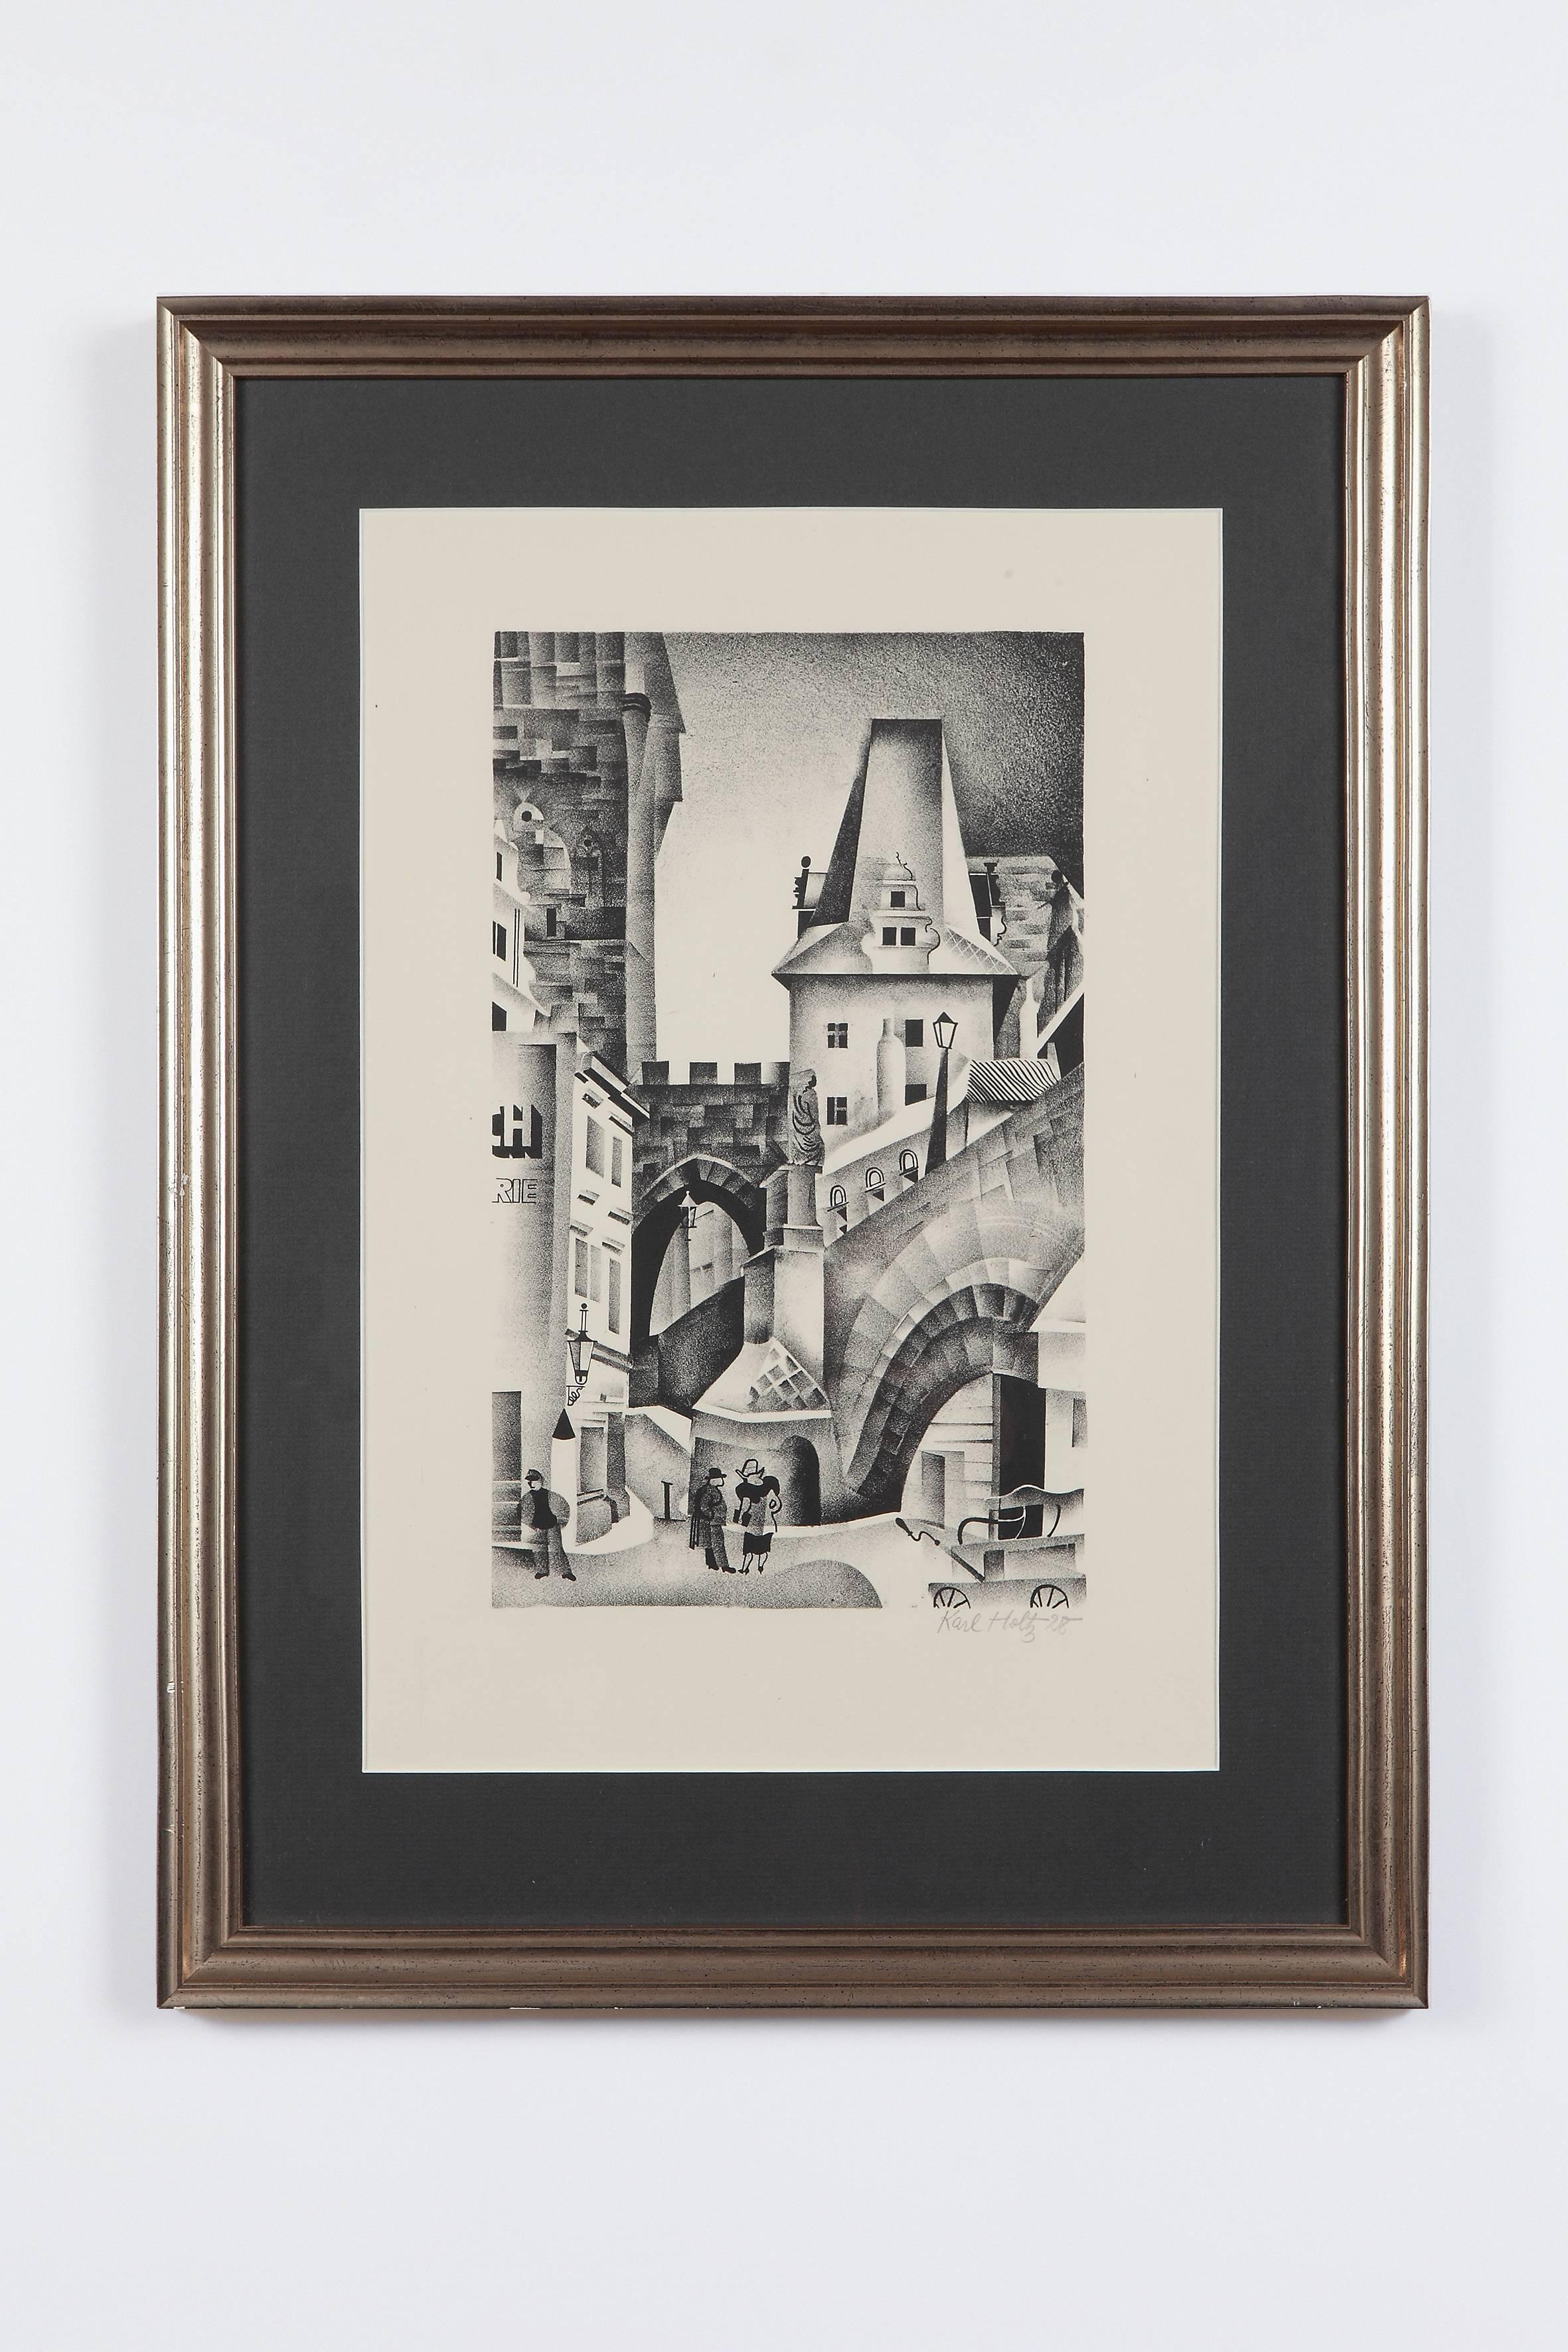 Lithograph, 1928 by Karl Holtz ( Germany ). Signed and dated lower right: Karl Holtz 28. Framed. Dimensions: 13.19 x 8.27 in ( 33,5 x 21 cm )
